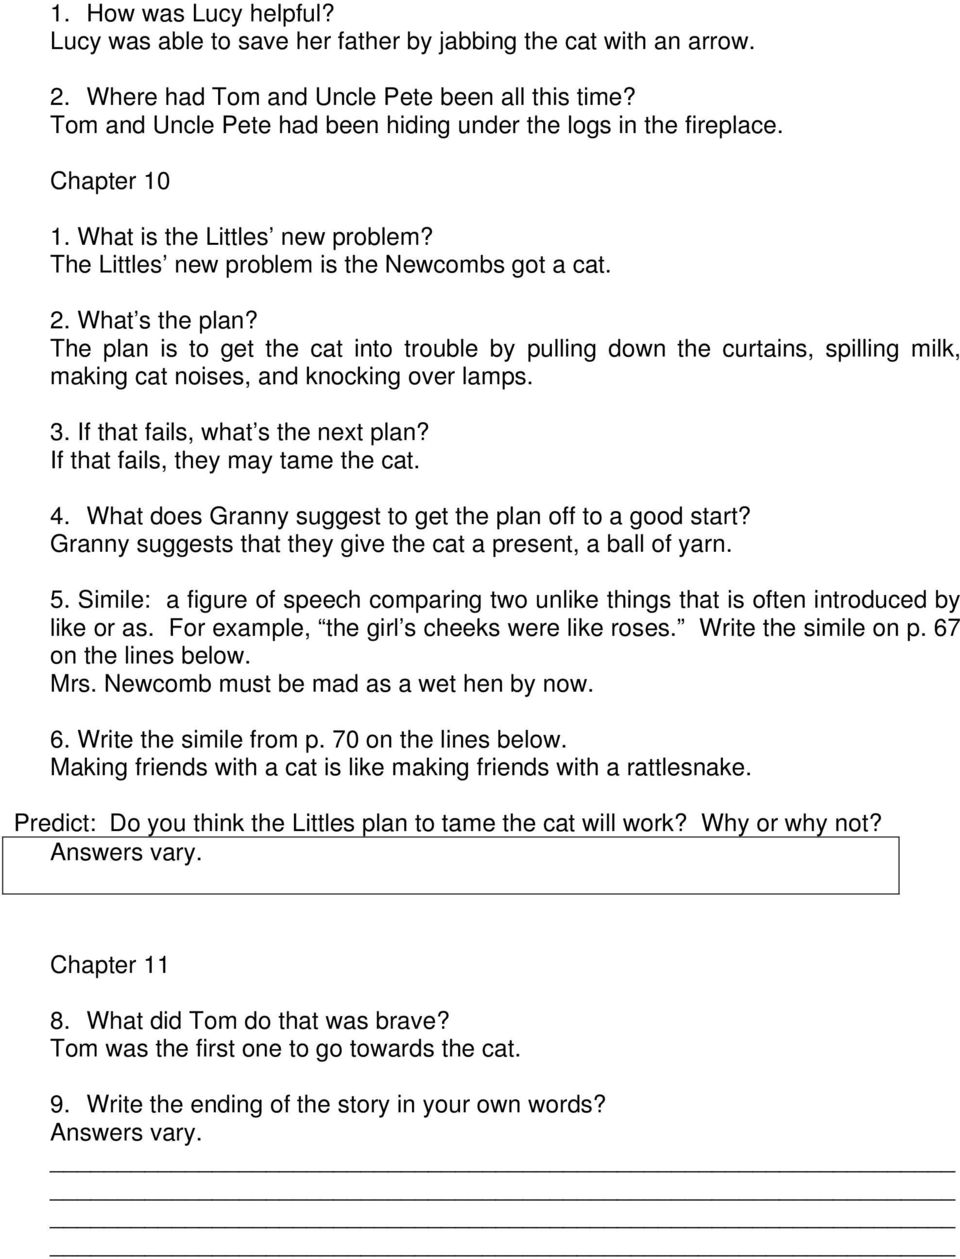 The Littles By John Peterson Comprehension Packet Includes Activities Such As Comprehension Questions Vocabulary Making Predictions Drawing Pdf Free Download